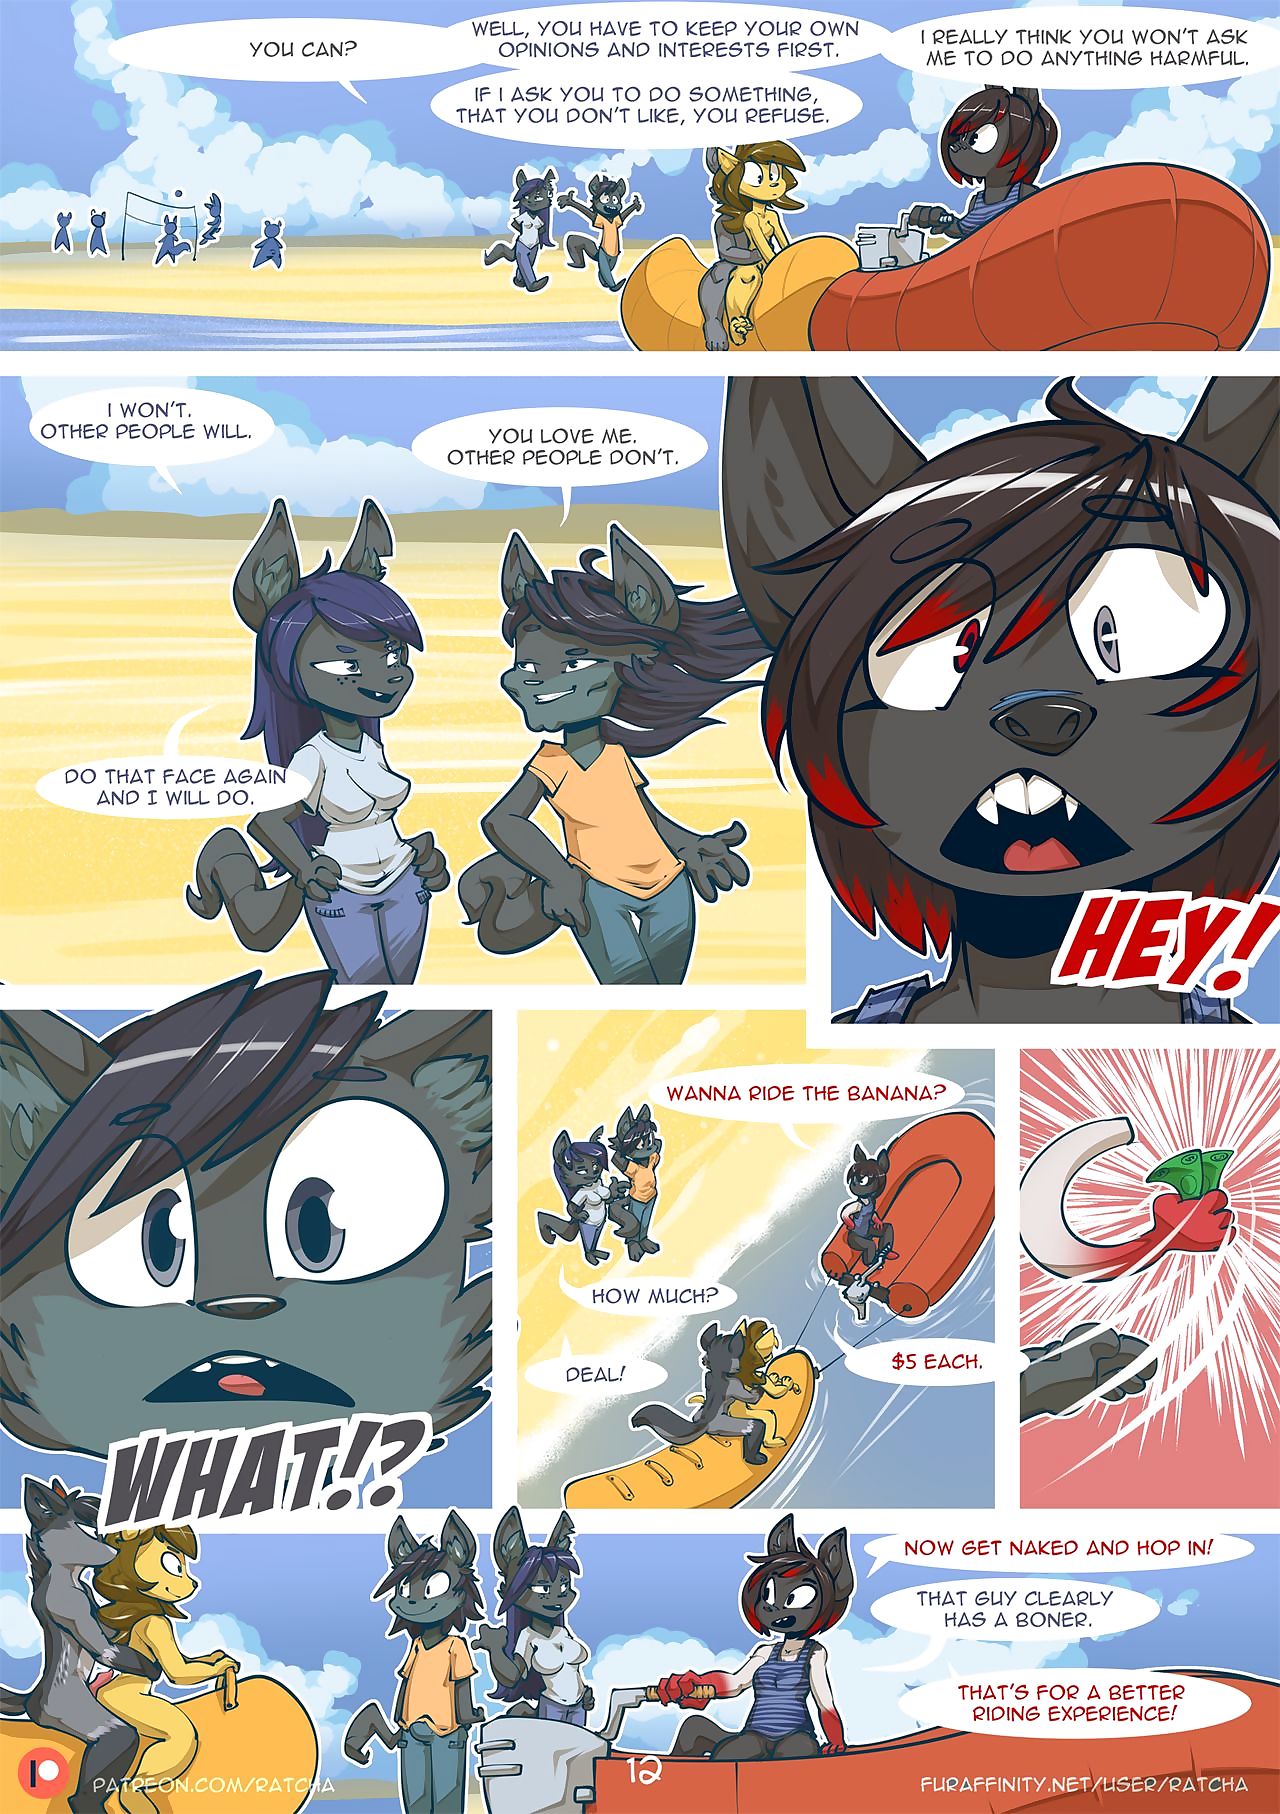 ratcha here’s 色情 ch.4 page 1